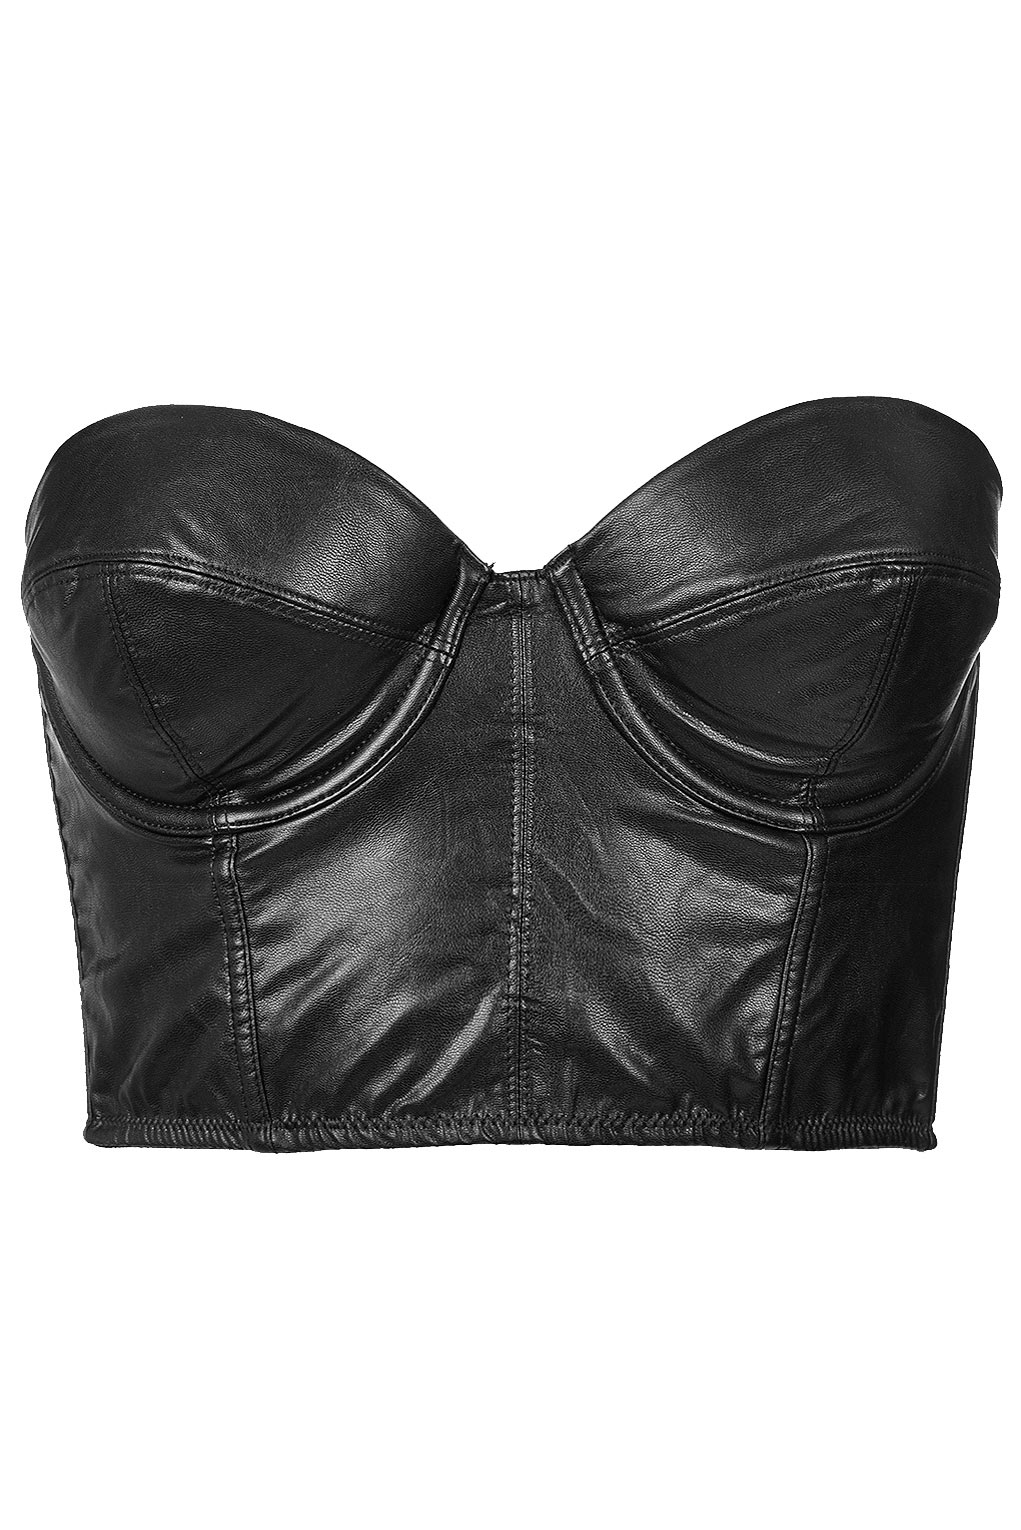 Lyst - Topshop Strapless Leather Look Corset in Black